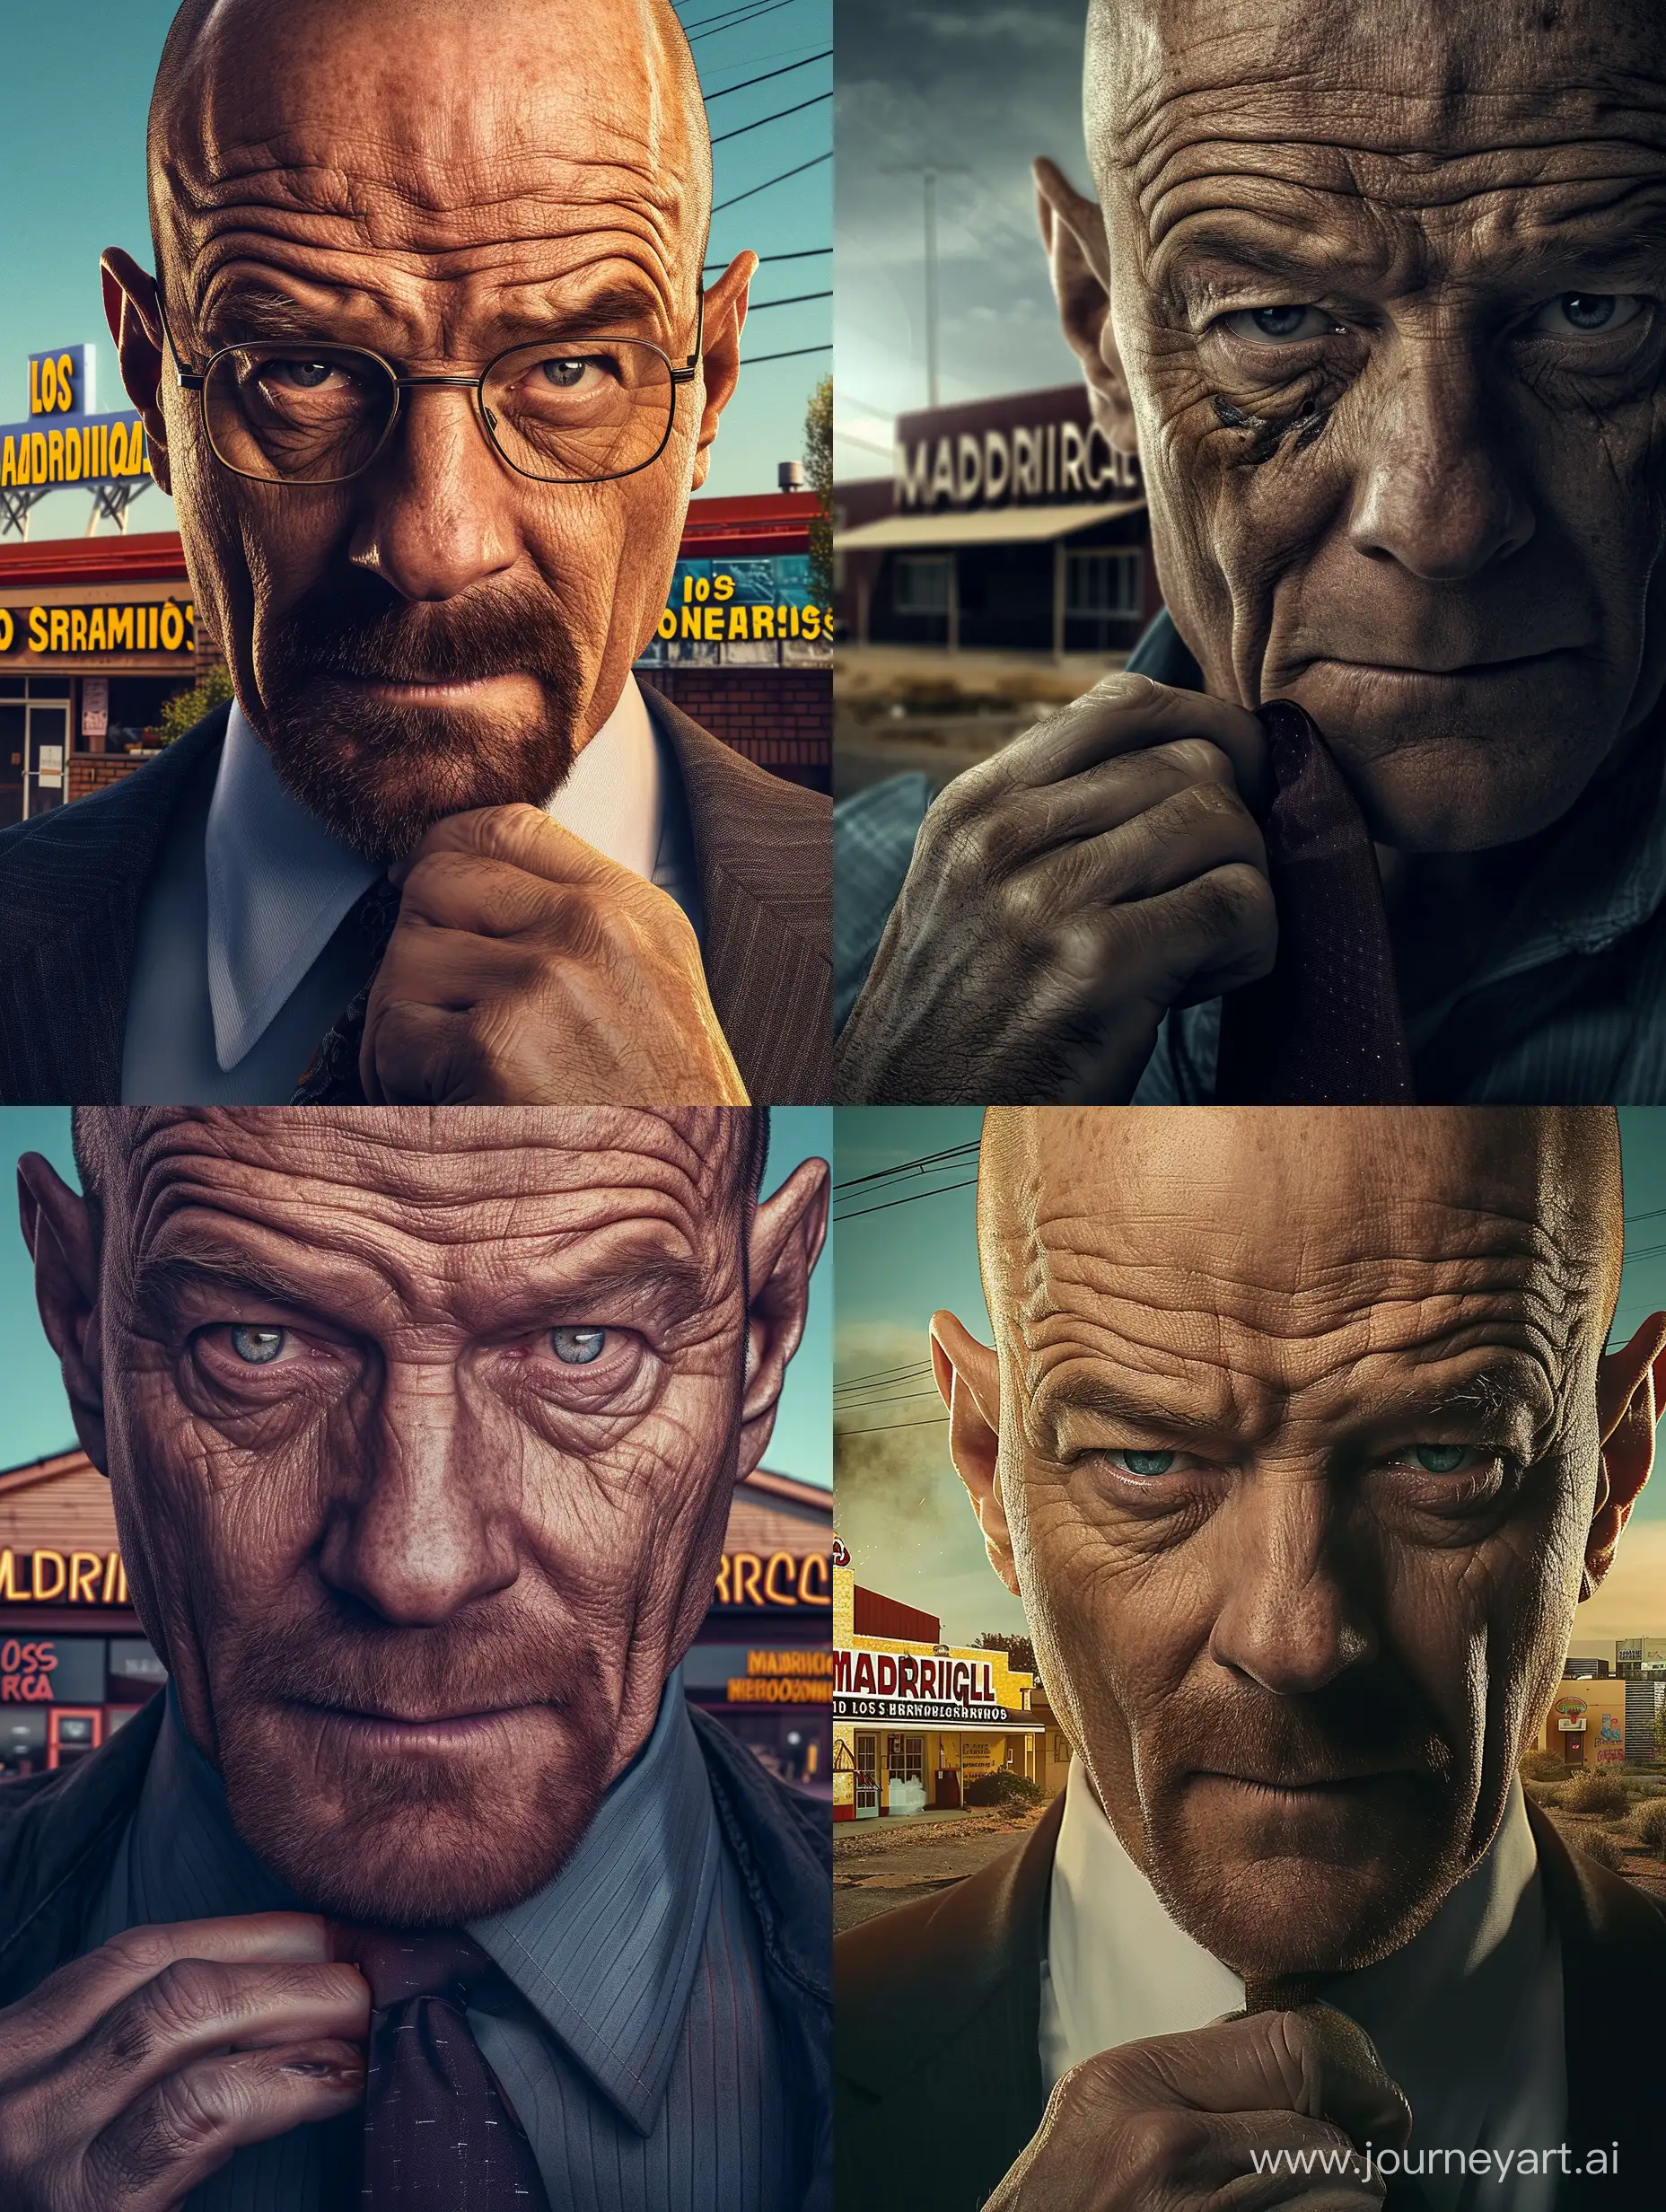 Breaking Bad Gustavo Fring movie poster set, face close-up, Gustavo straightening his tie with his hand, company building with "Madrigal" written in the background, los pollos hermanos business location in the left background, 4k realistic